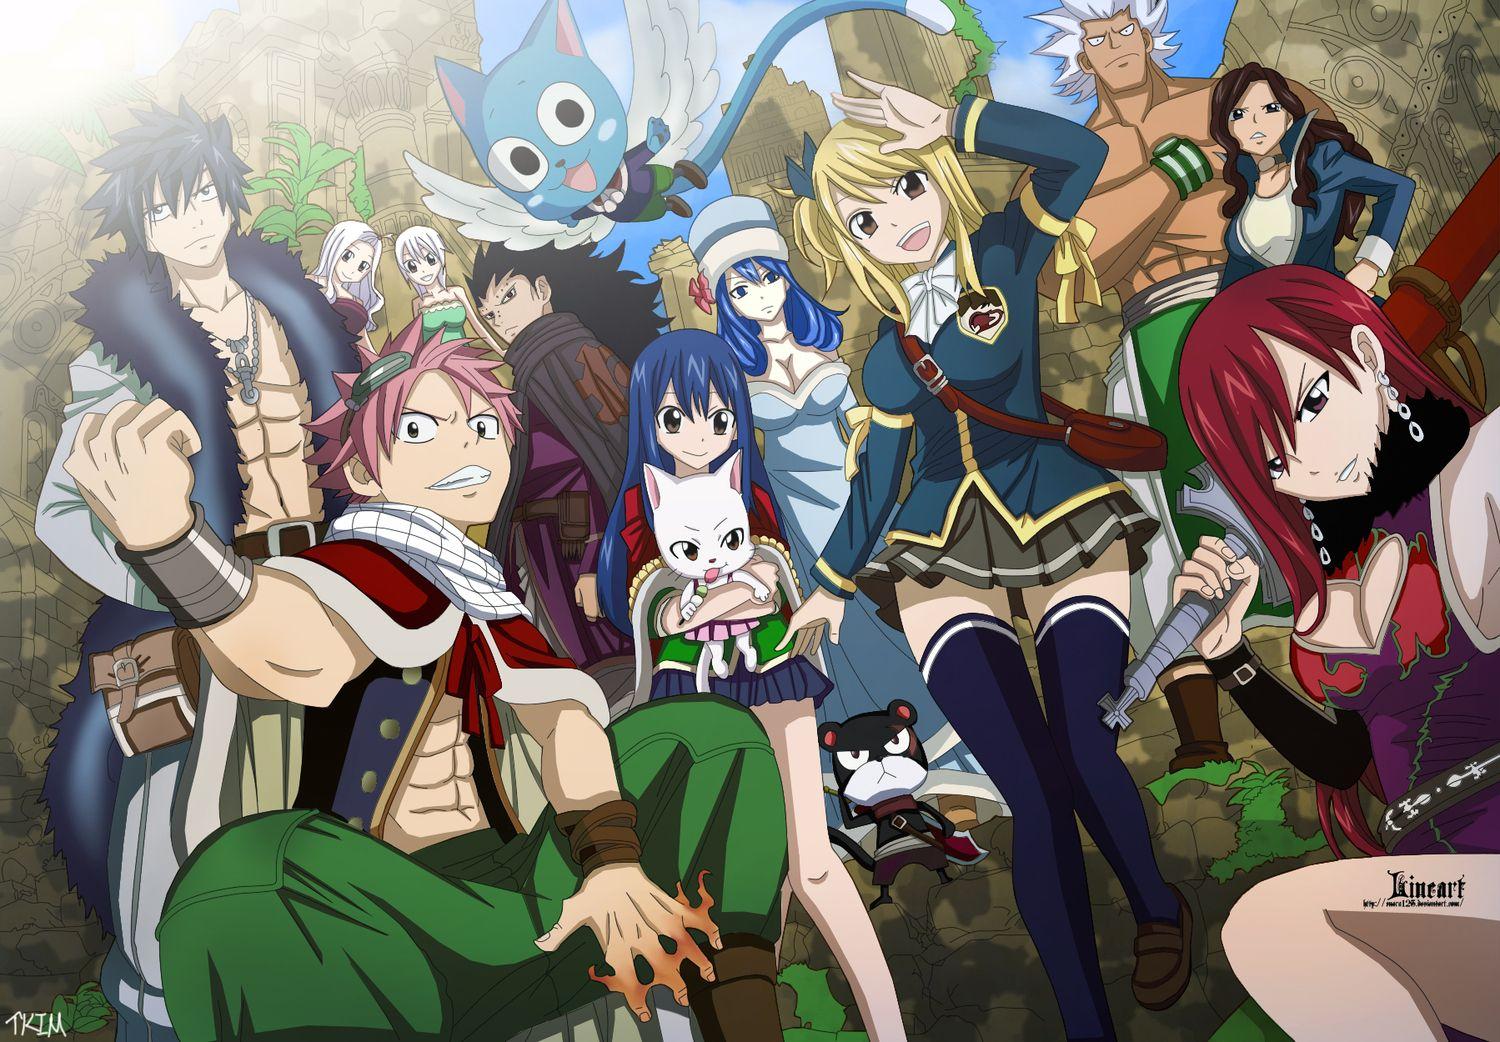 Fairy Tail Group Wallpaper